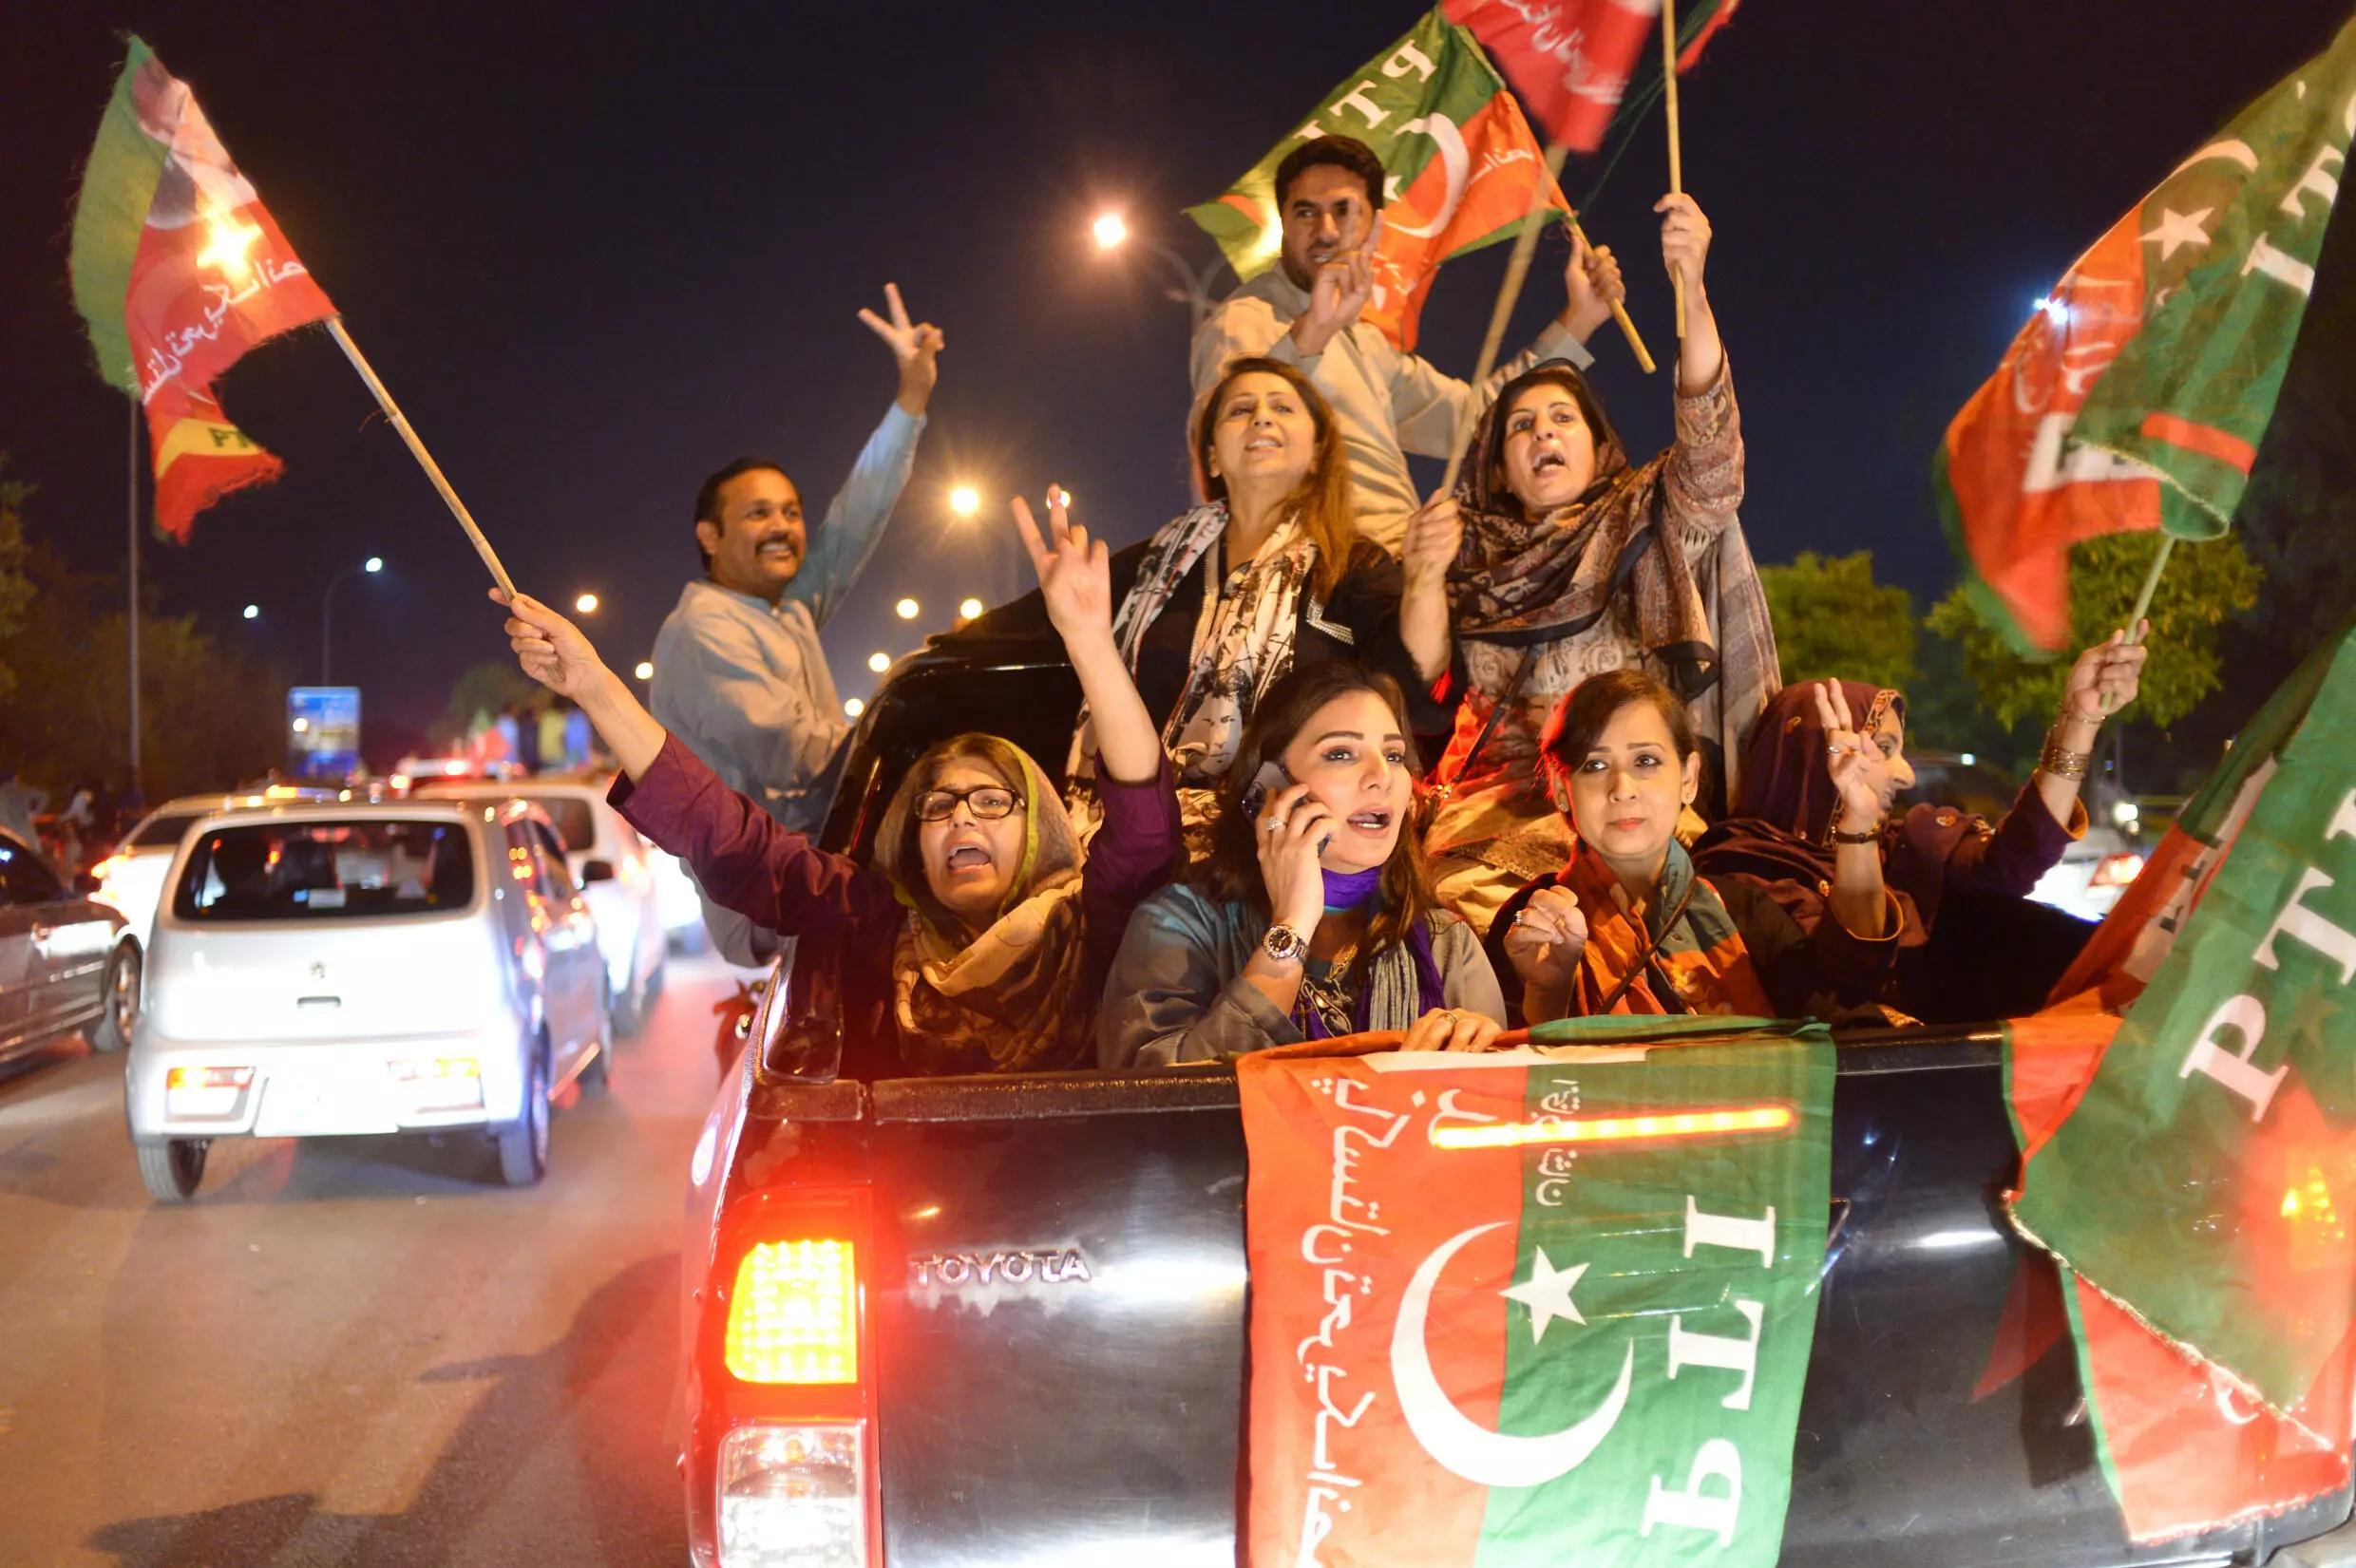 PTI supporters take part in a rally in support of former prime minister Imran Khan in Islamabad on April 10. REUTERS